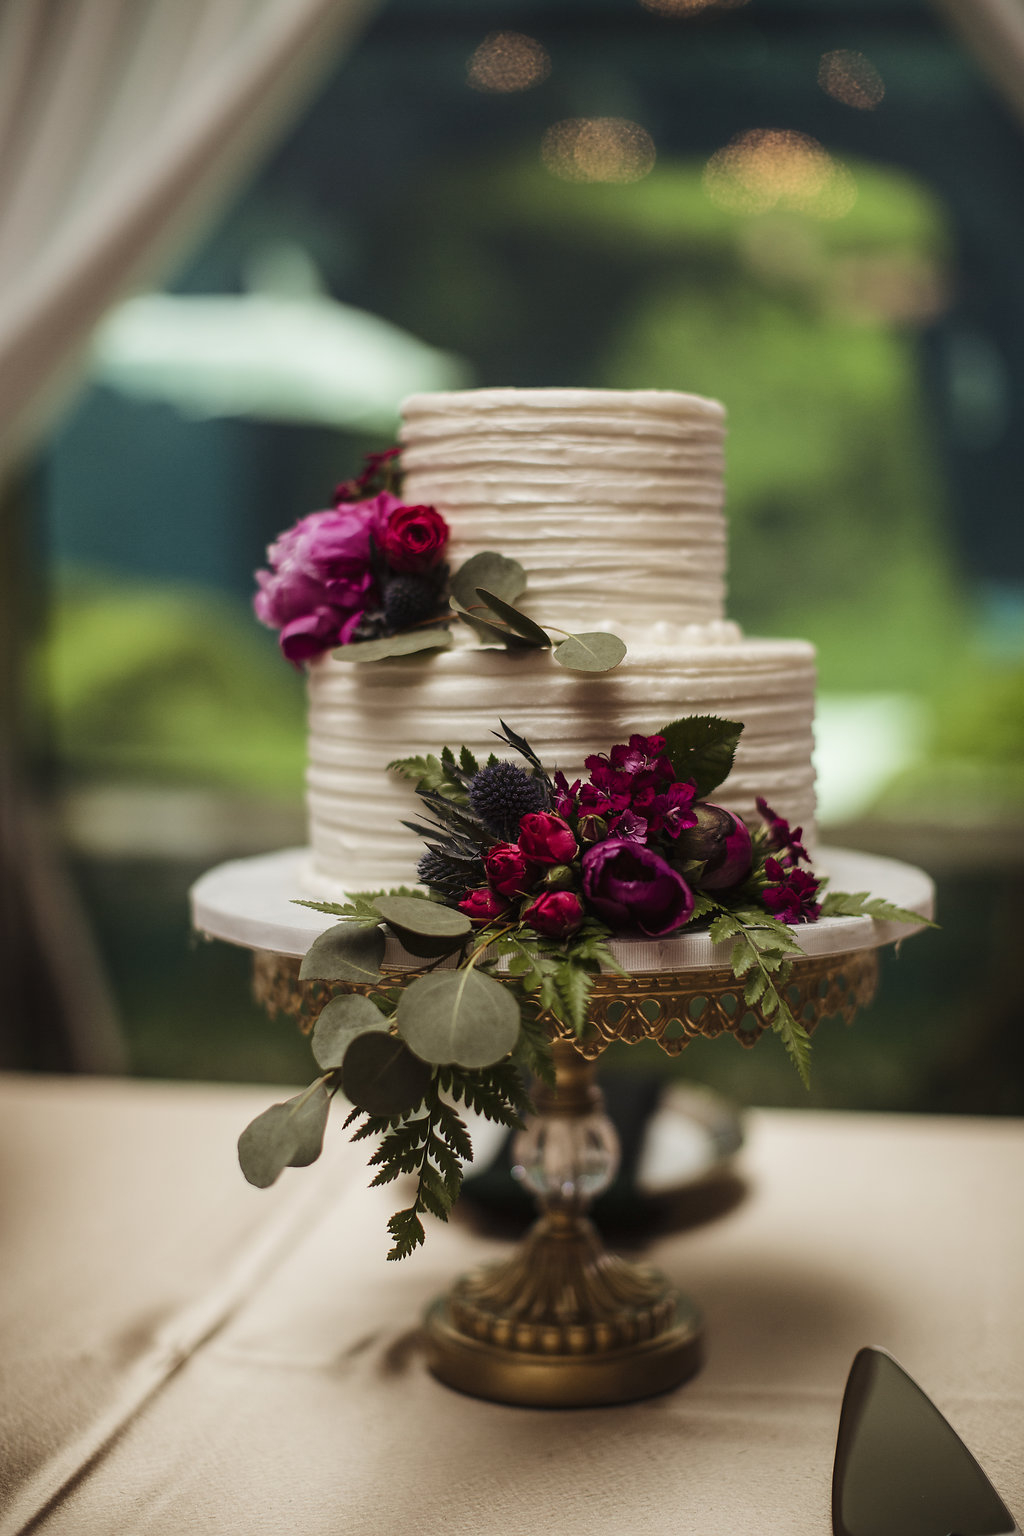 Two Tier Round White Wedding Cake on Ornate Gold Cake Stand with Fuchsia and Red Flowers with Greenery